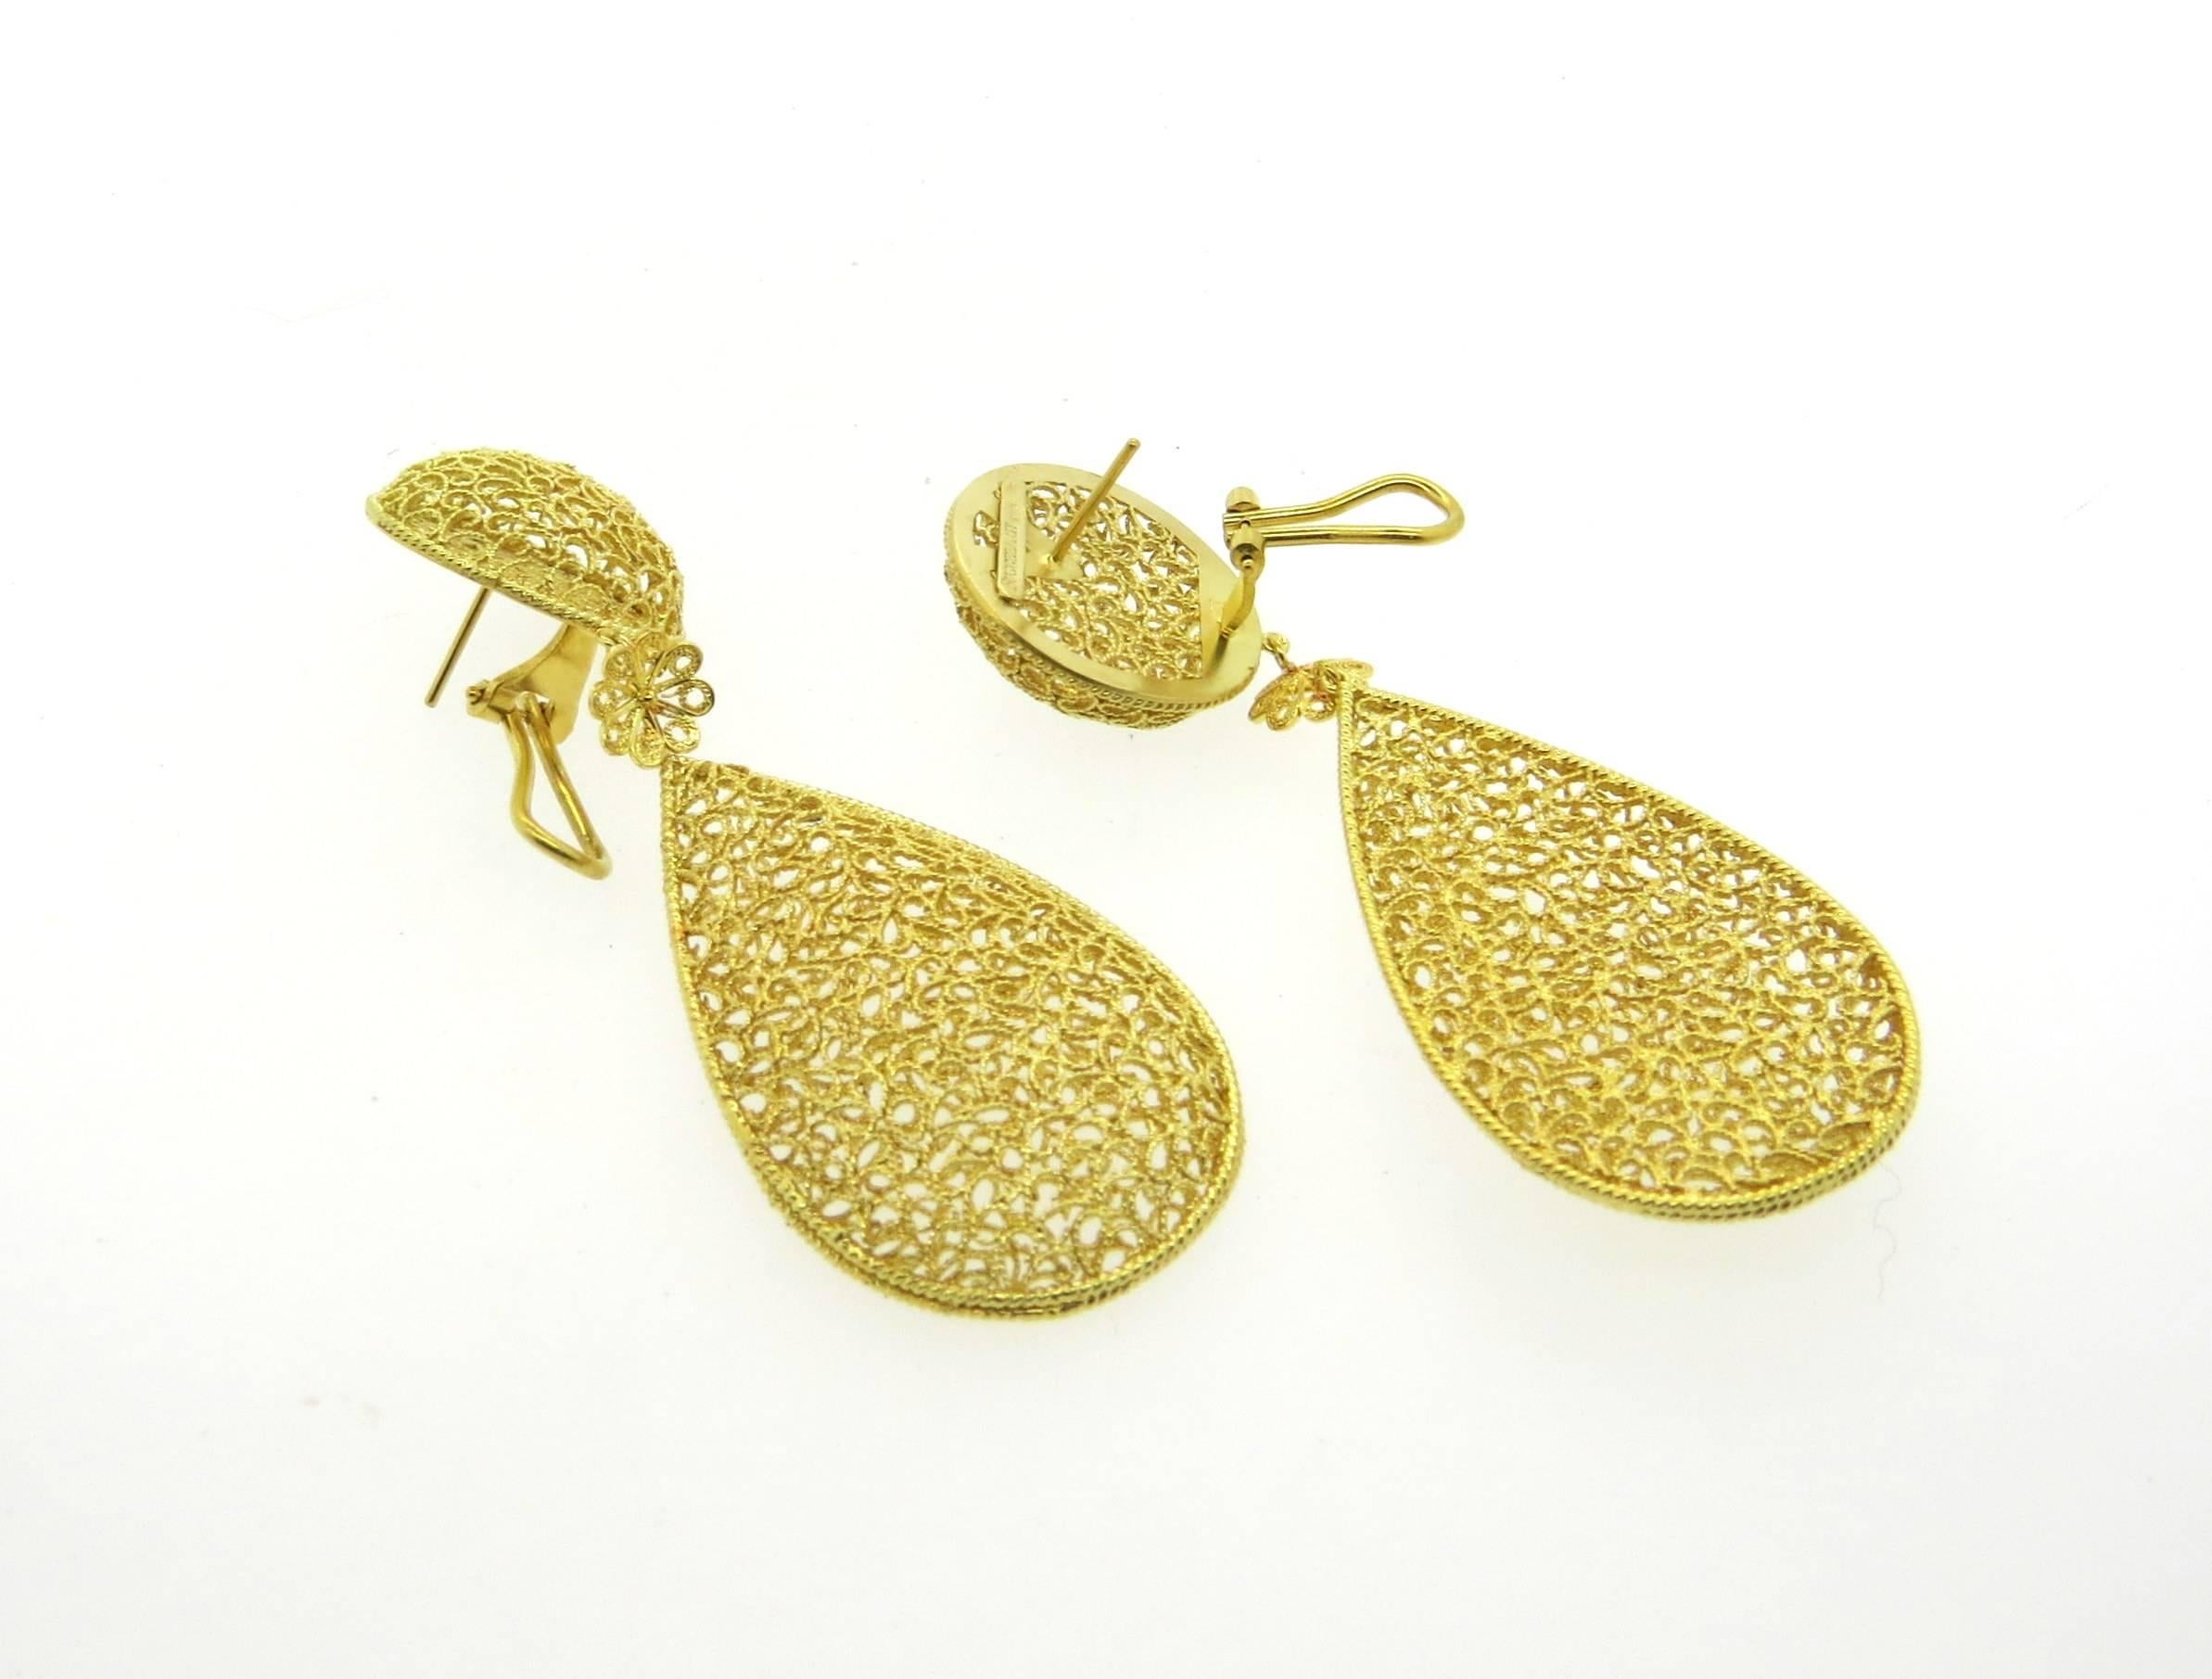 Long 18k yellow gold earrings, crafted by Buccellati. Earrings are 75mm long x 27mm wide. Marked: Buccellati 750. Weight - 27.6 grams
Come with original Buccellati paperwork